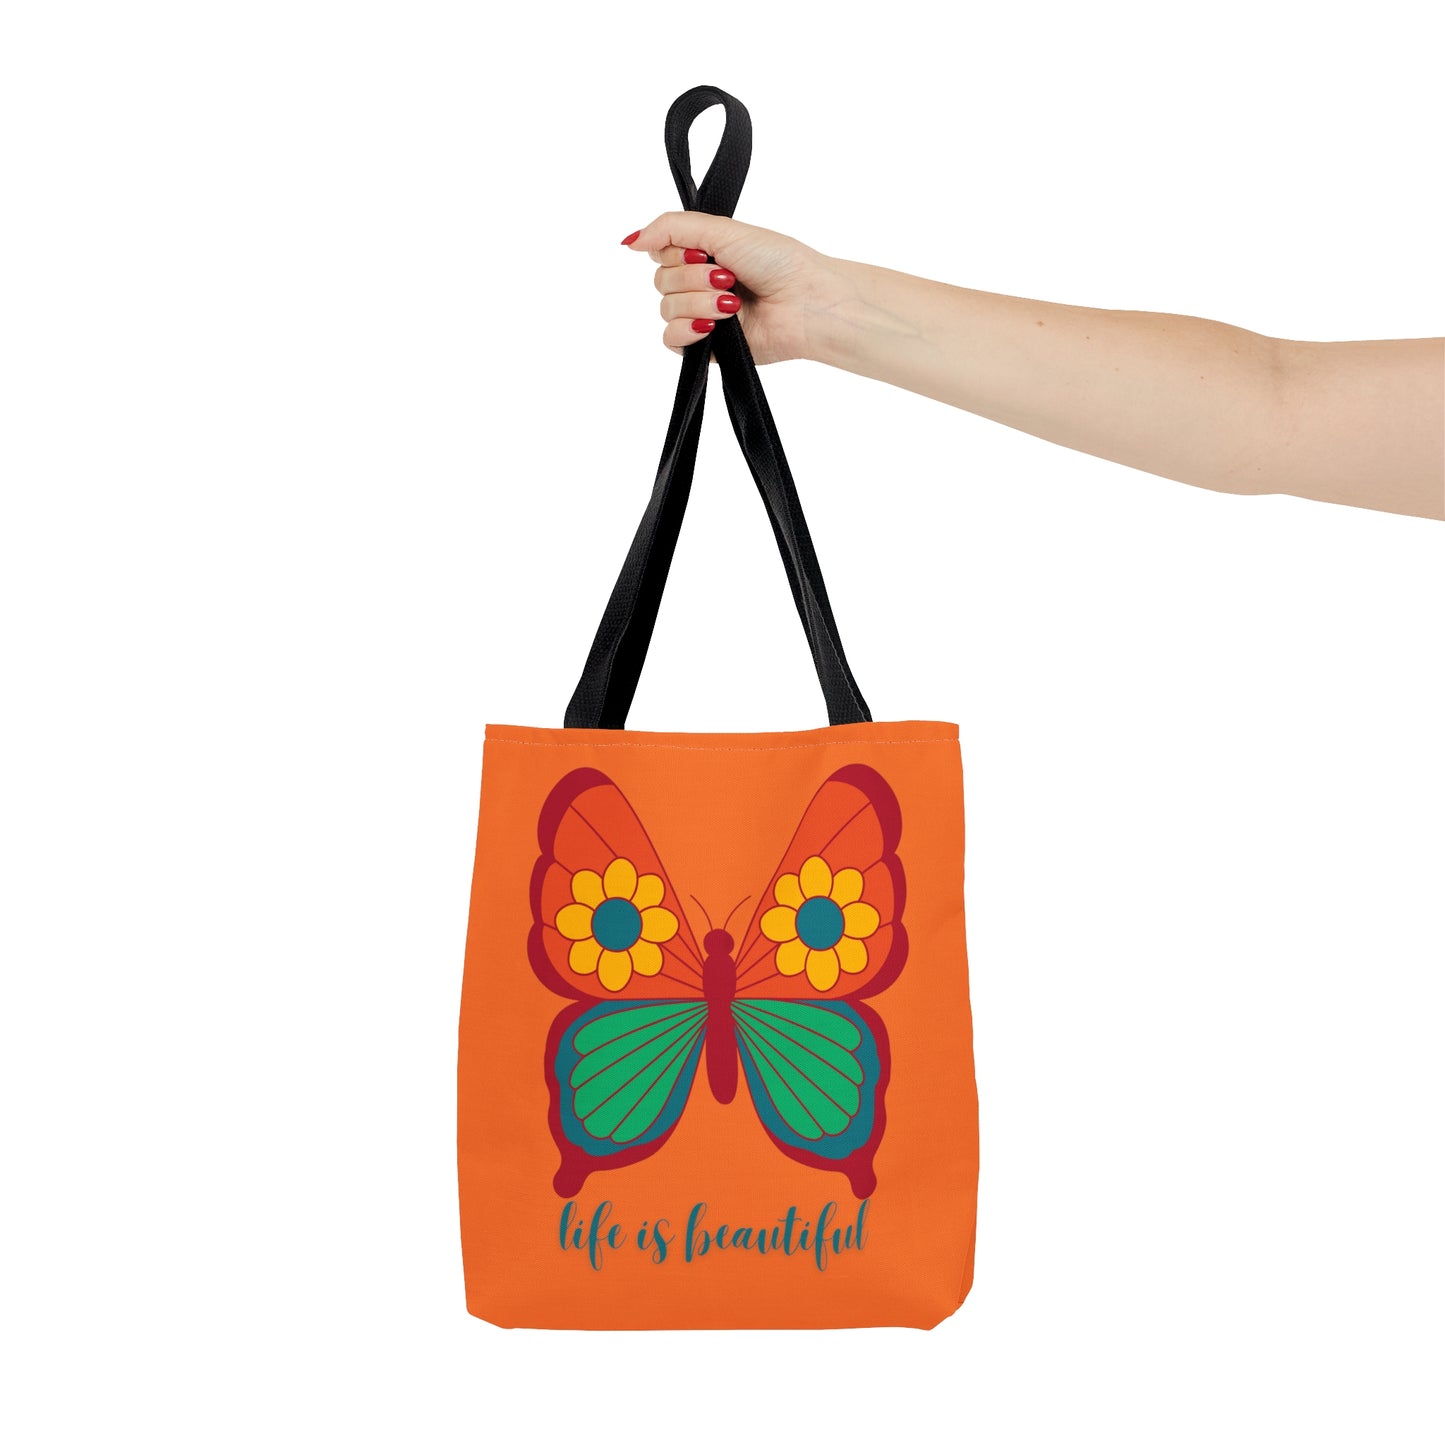 Cute and simple message “life is beautiful” under a butterfly design tote bag. Come in 3 sizes to meet your needs.